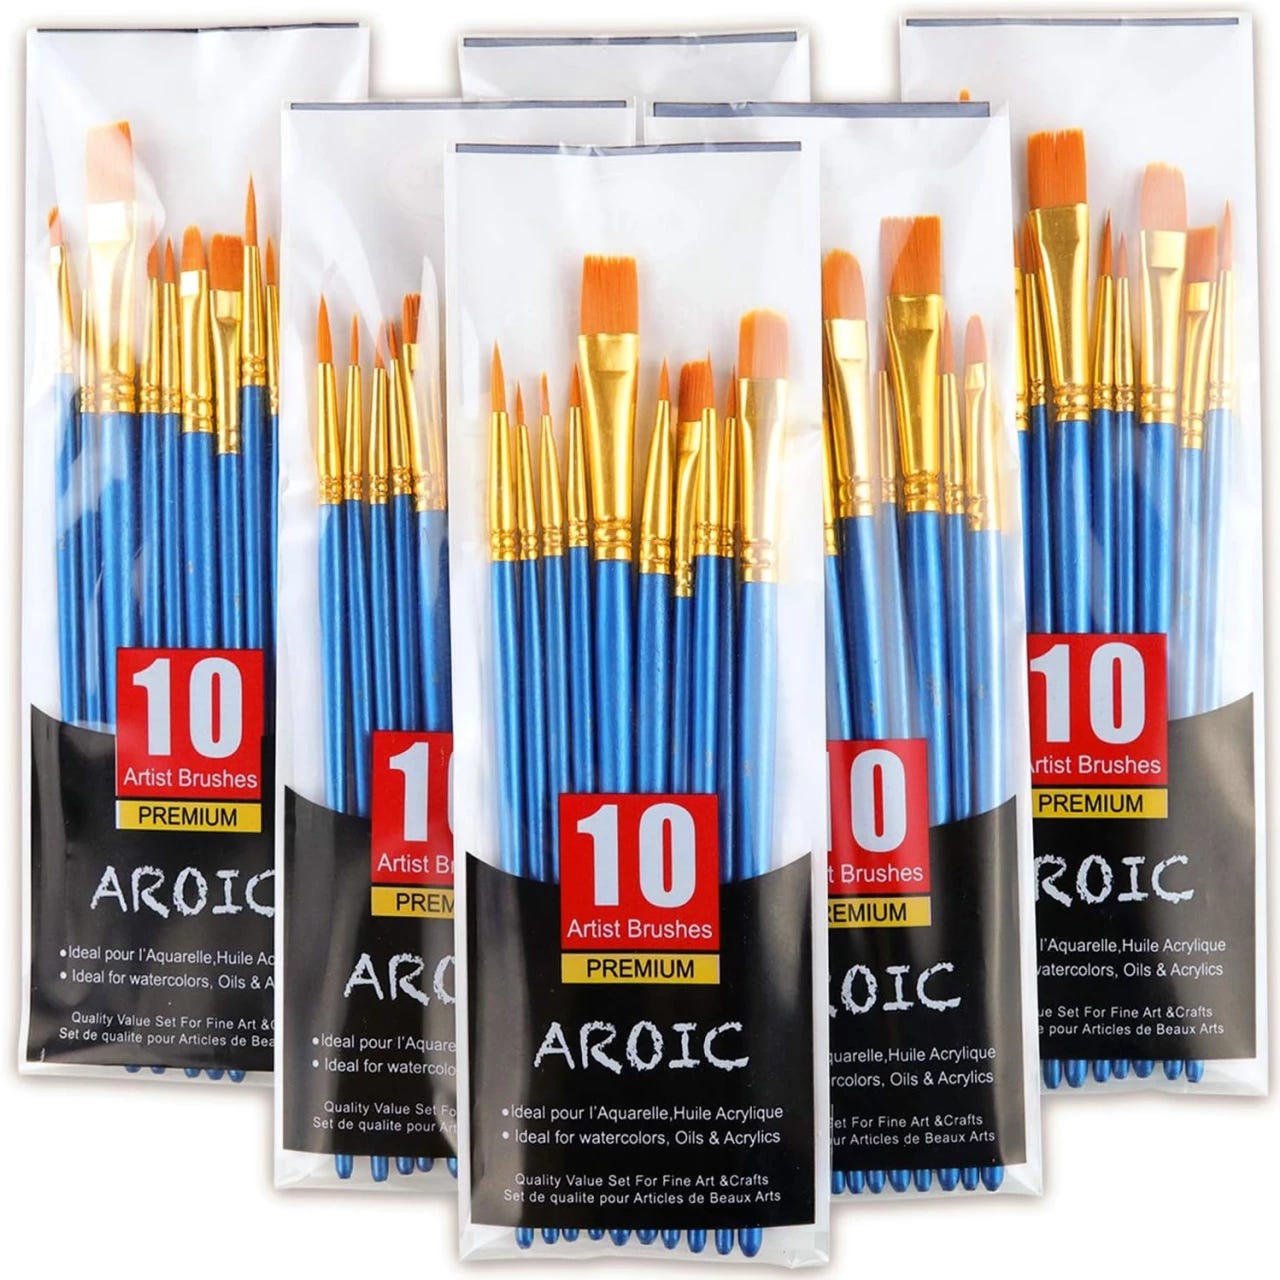 BOSOBO Paint Brushes Set, 2 Pack 20 Pcs Round Pointed Tip